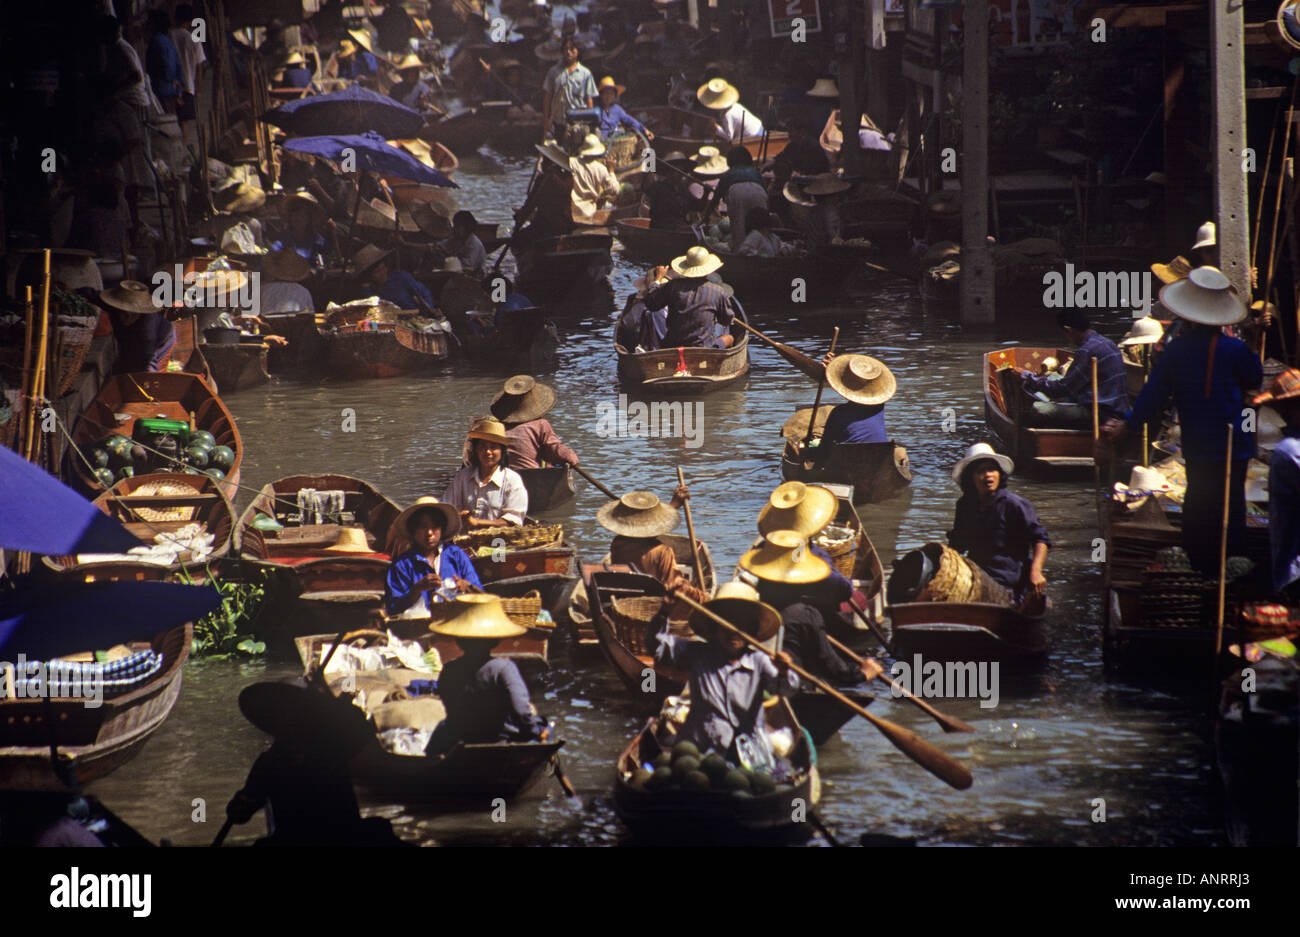 A large number of locals all wearing traditional wide brimmed hats in small wooden boats filled with fresh produce and other items to sell at the floating market at Damnoen Saduak Stock Photo